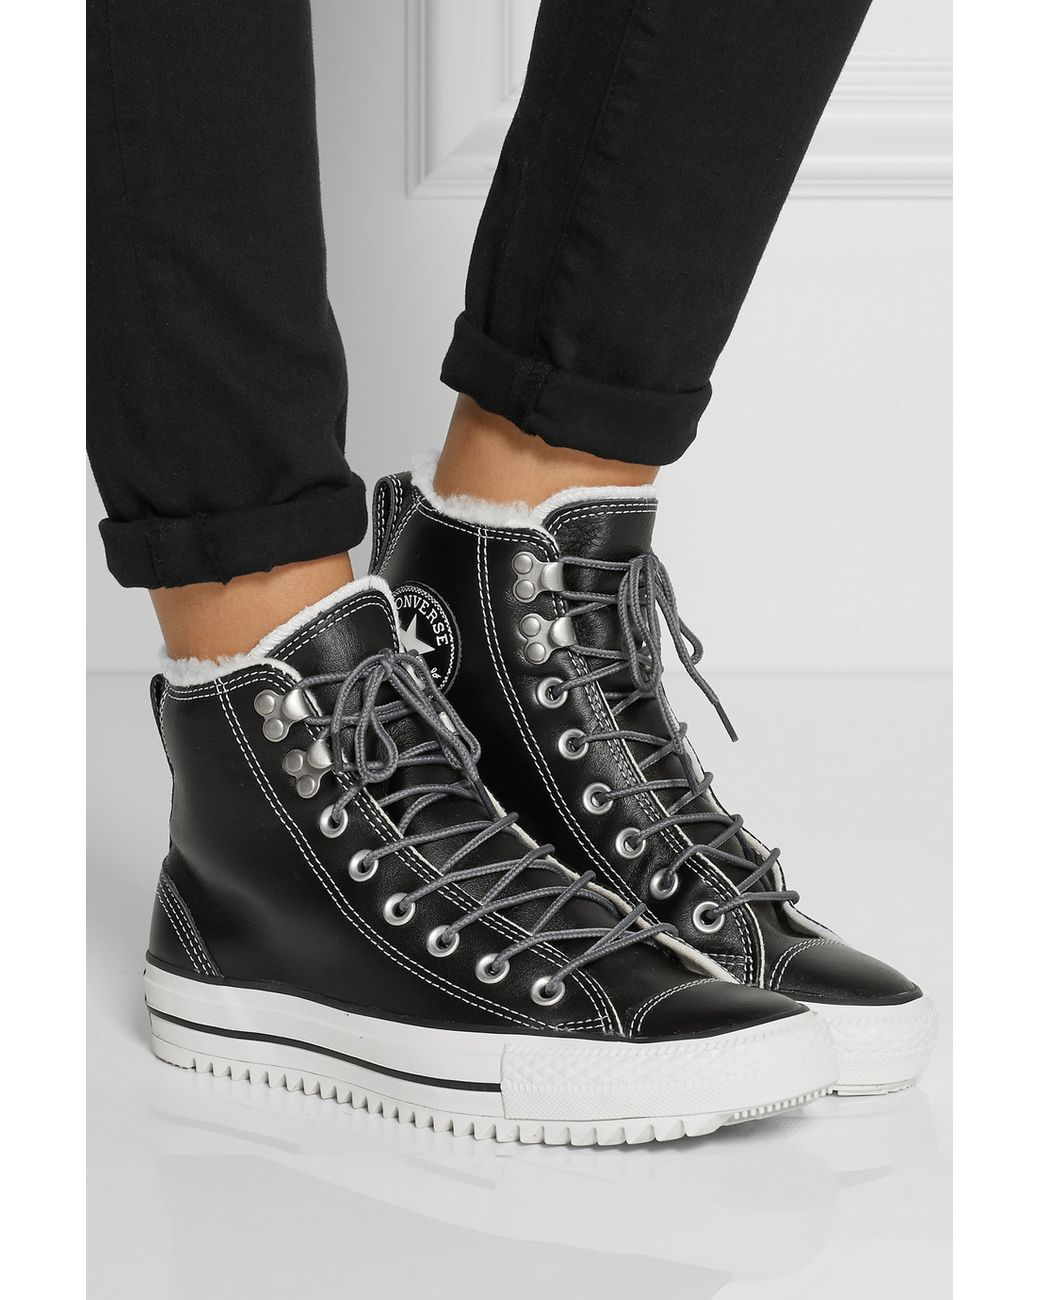 Converse Taylor All Star City Hiker Shearling-Lined High-Top Sneakers Black Lyst